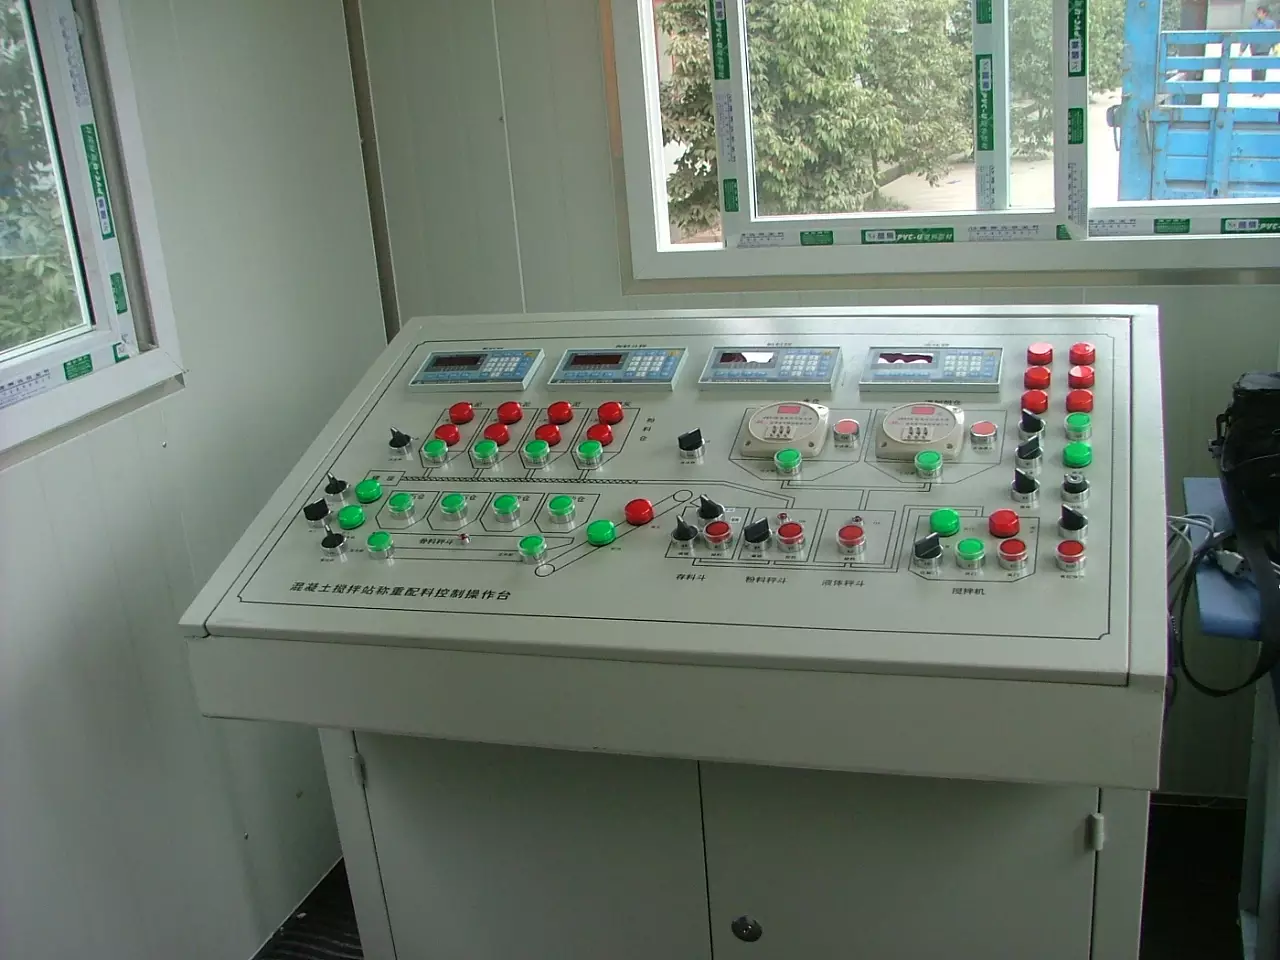 Weighing and Batching Control Cabinet and Console1